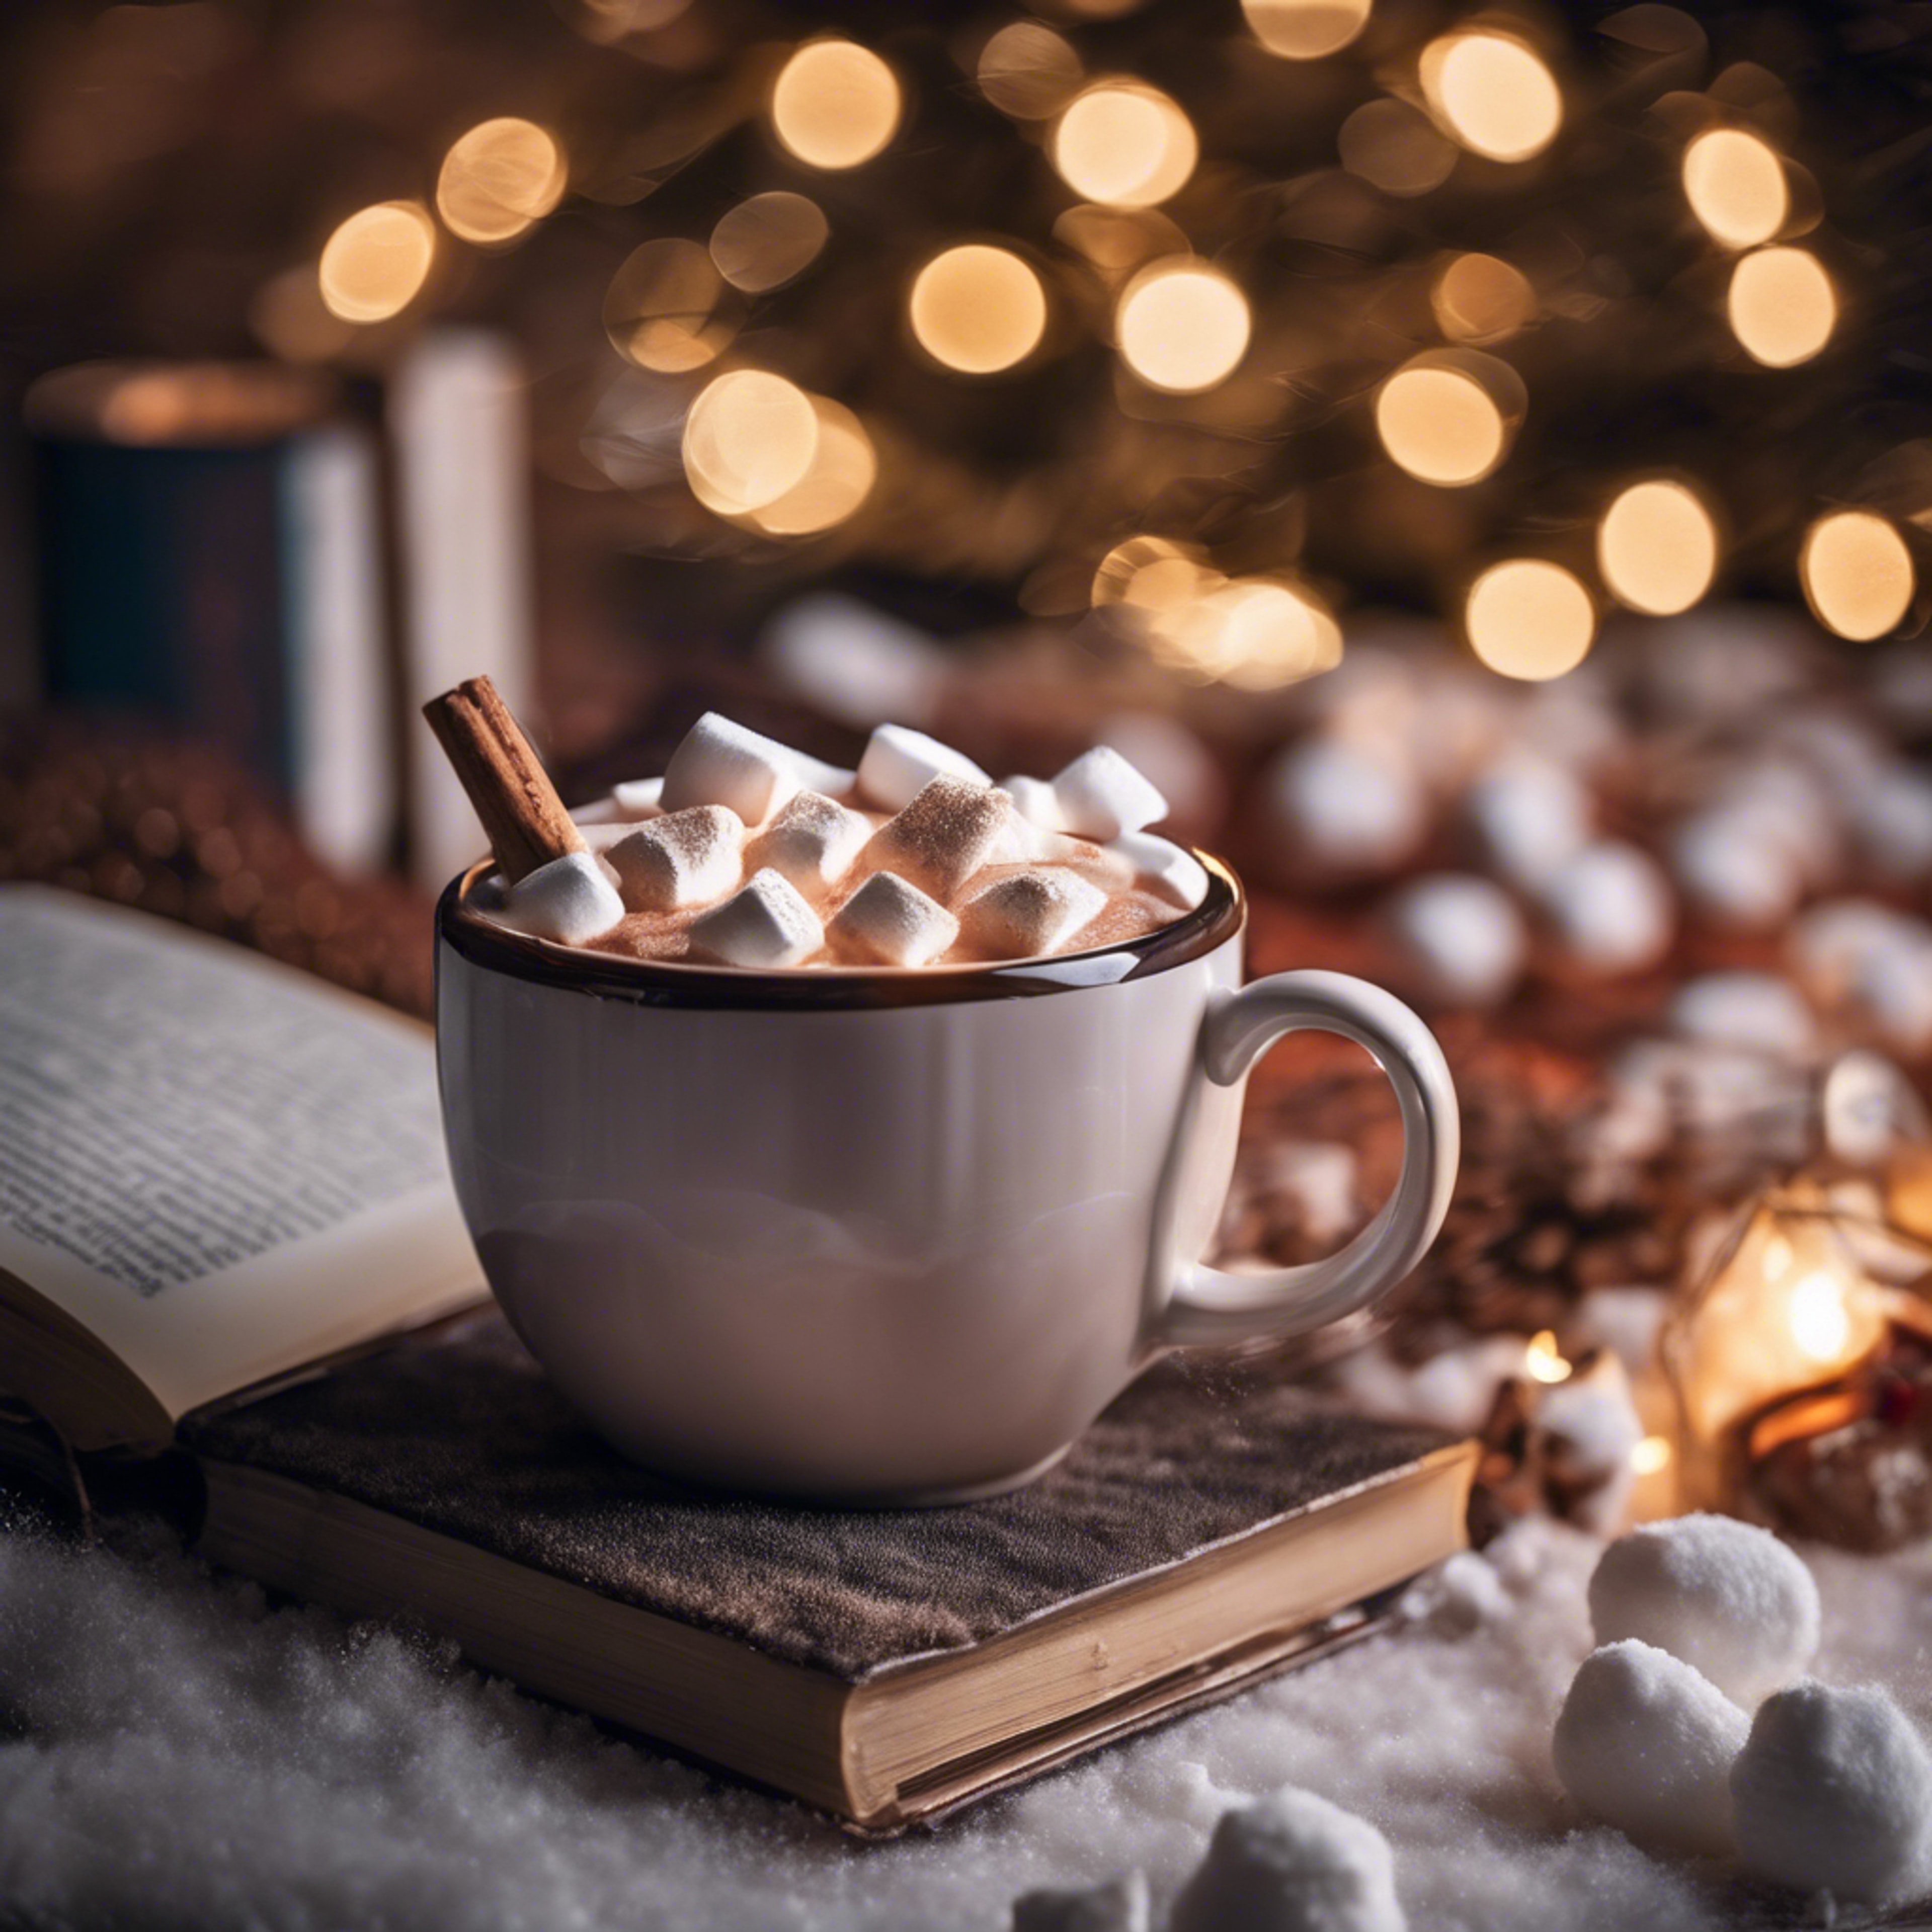 A steaming mug of hot cocoa topped with marshmallows, paired with a good book on a winter night. ផ្ទាំង​រូបភាព[bb1918feb58c4b029e23]